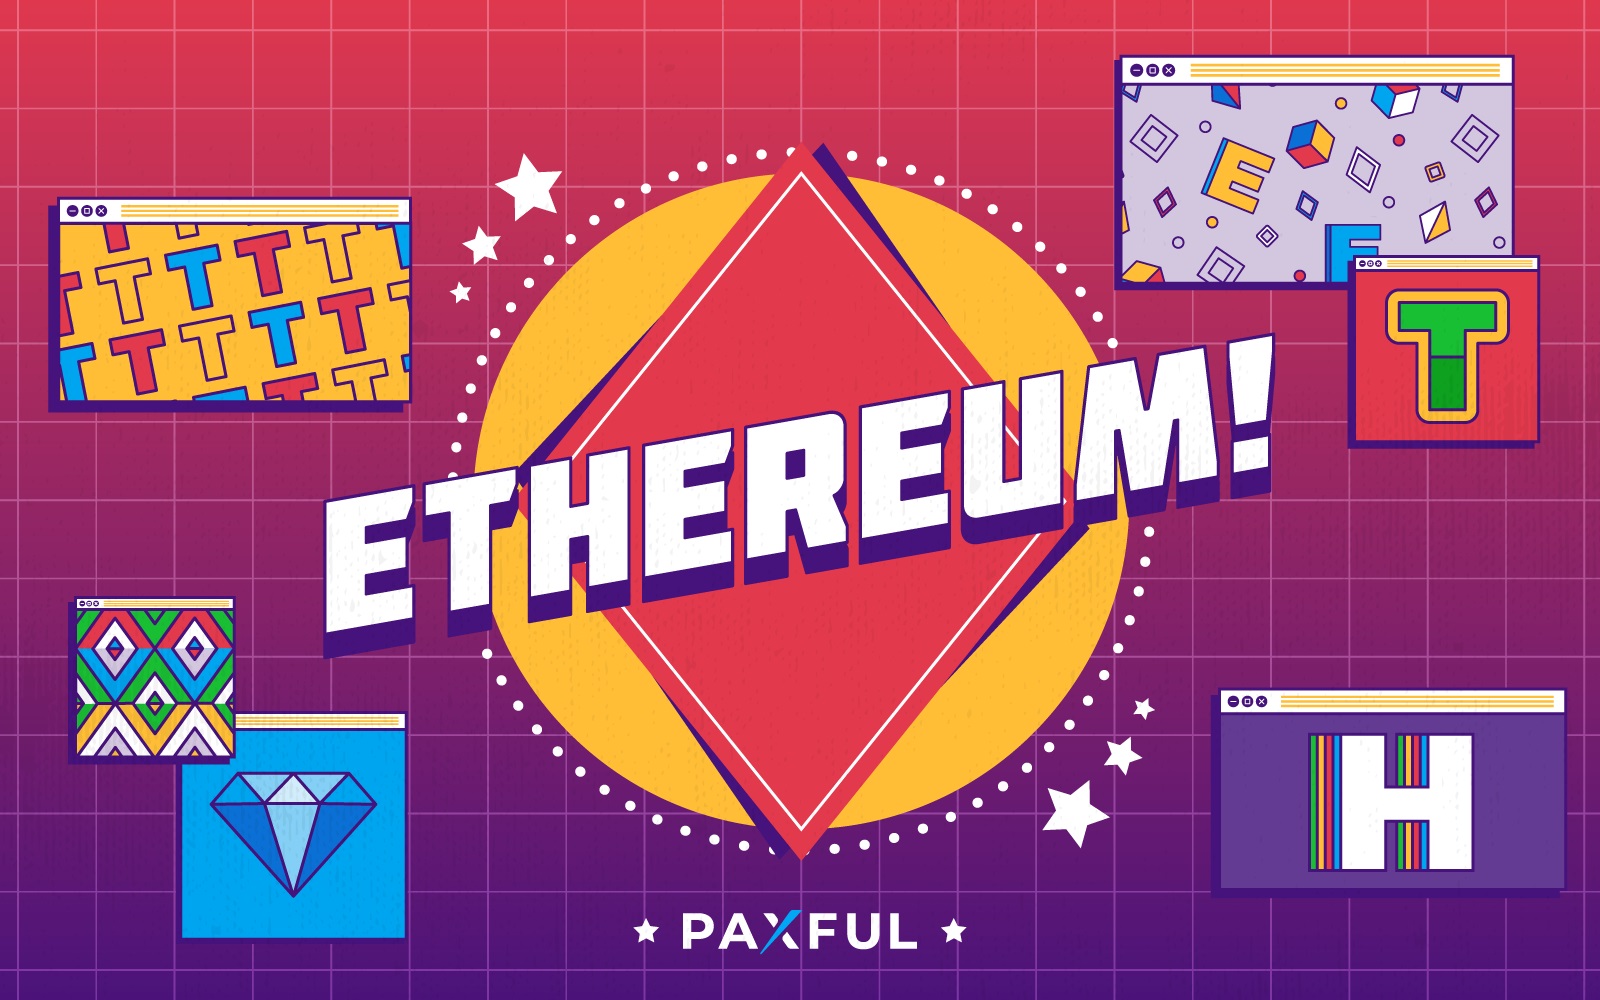 Ethereum paxful horse betting game app